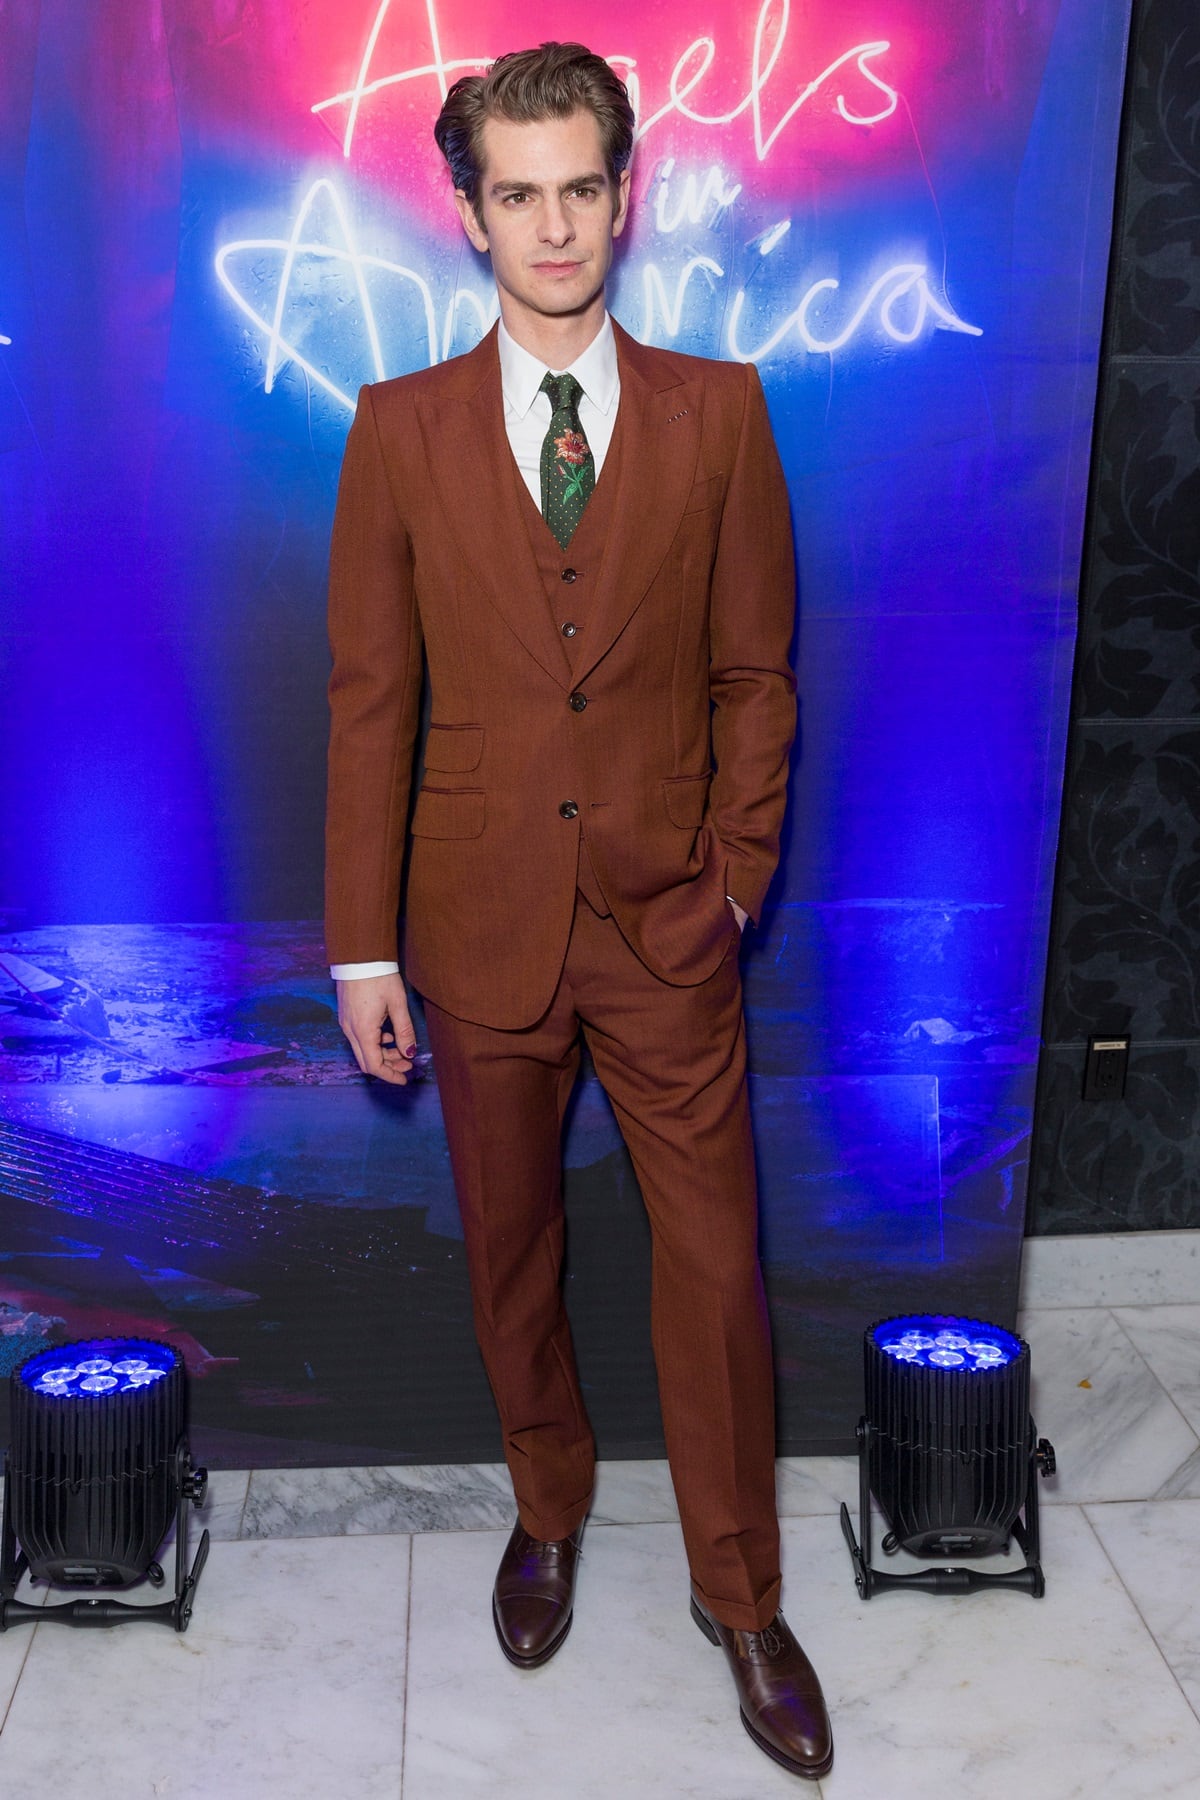 Andrew Garfield rocking a brown suit at the revival of Angels of America afterparty